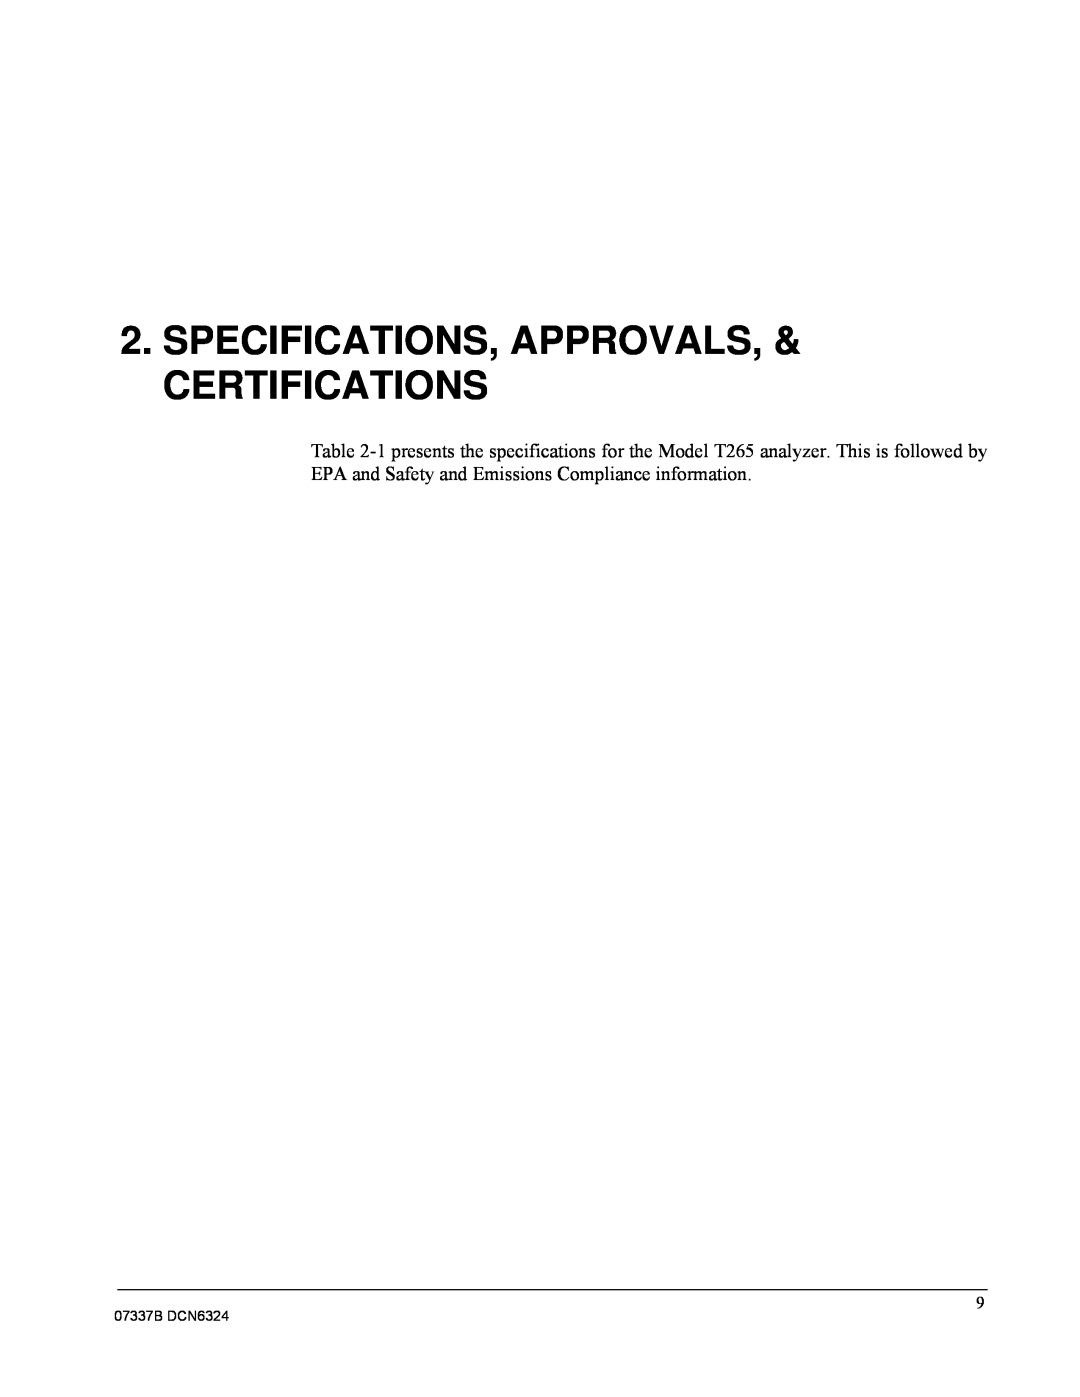 Teledyne T265 manual Specifications, Approvals, & Certifications, 07337B DCN6324 